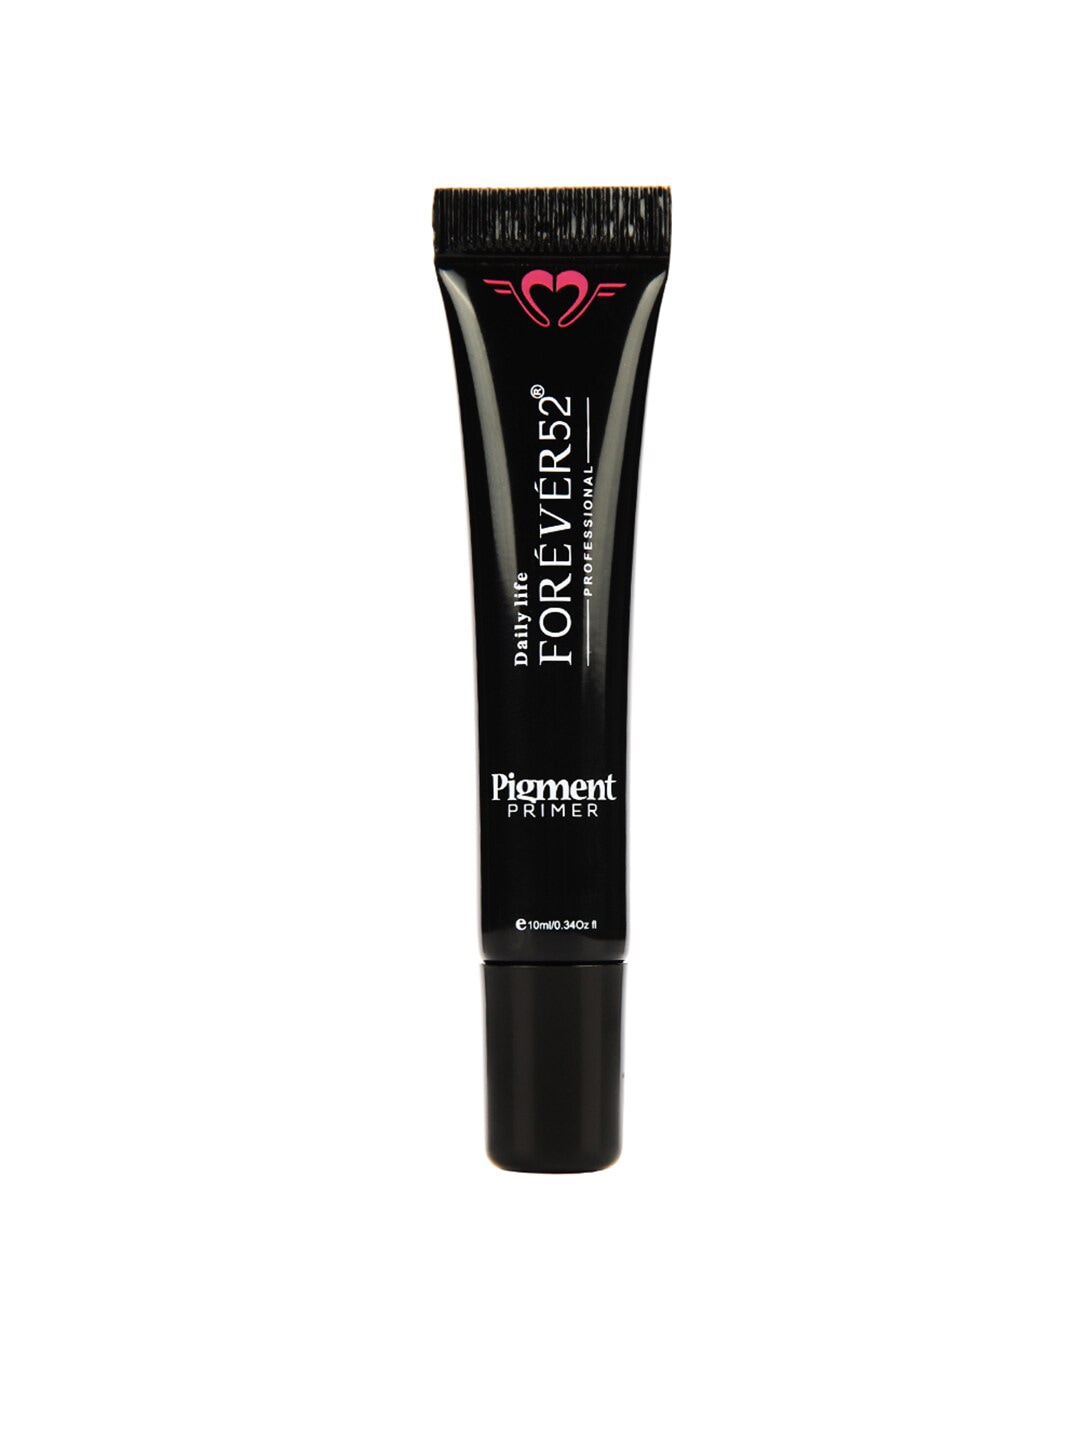 Daily Life Forever52 Pigment Primer 10ml Price in India